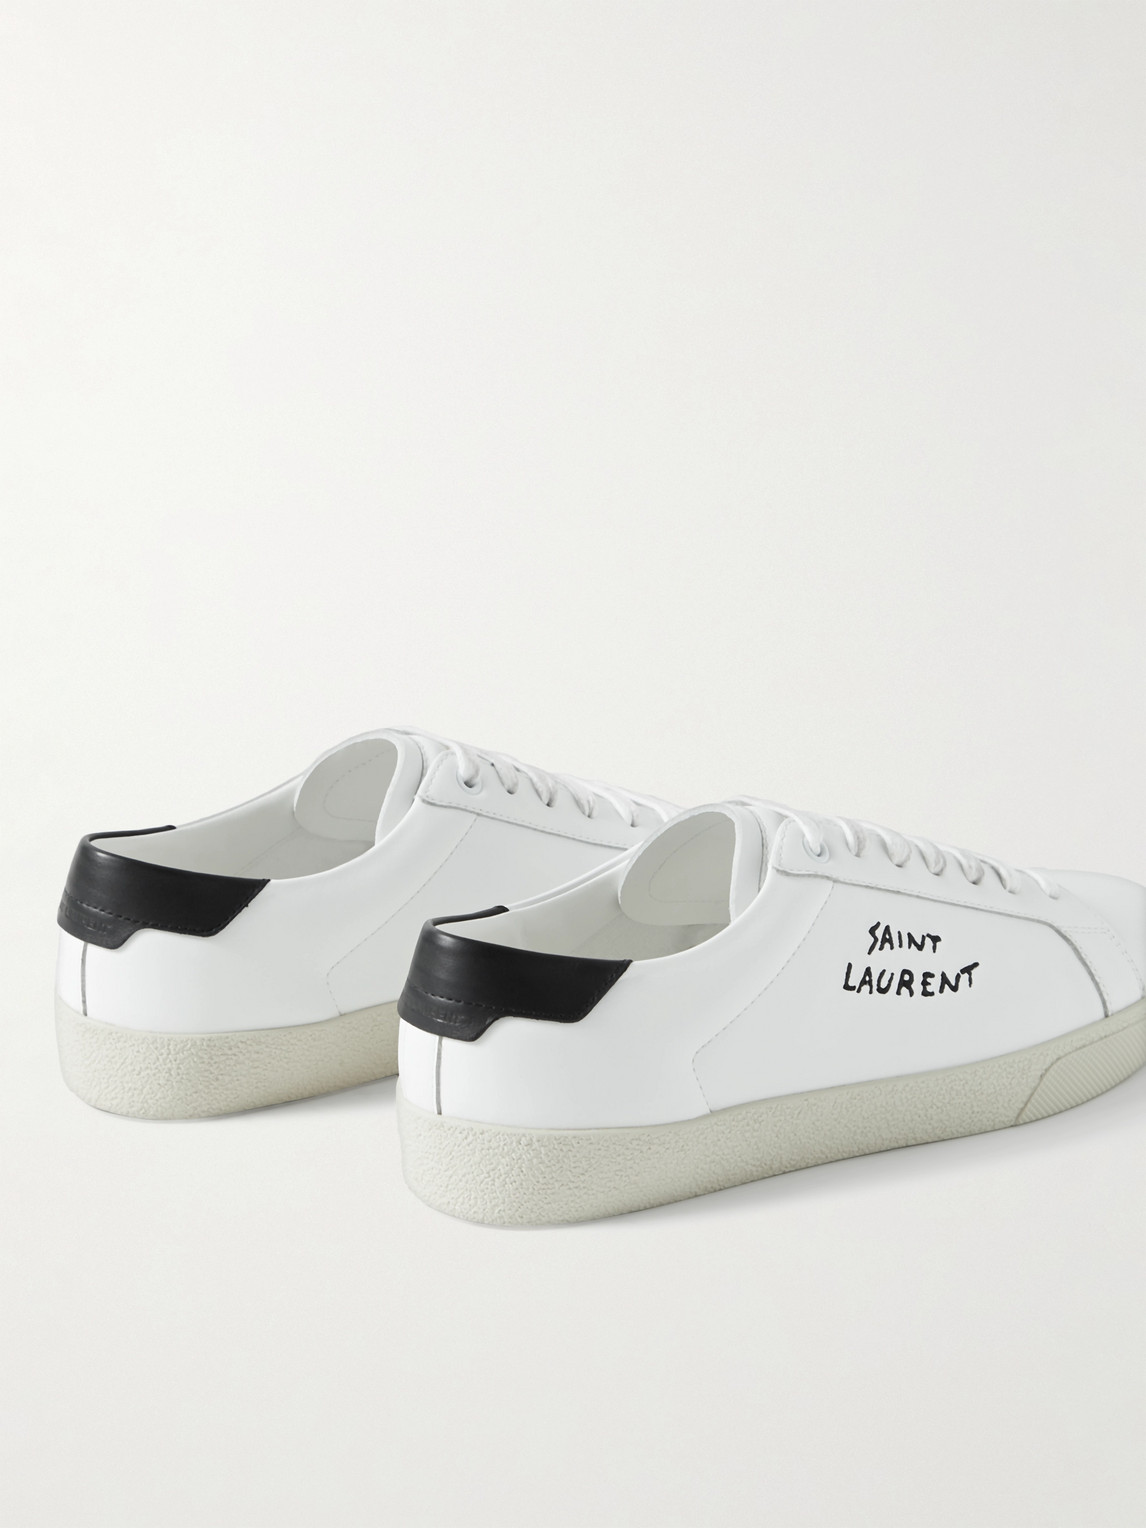 SAINT LAURENT SL/06 COURT CLASSIC LOGO-EMBROIDERED LEATHER SNEAKERS 